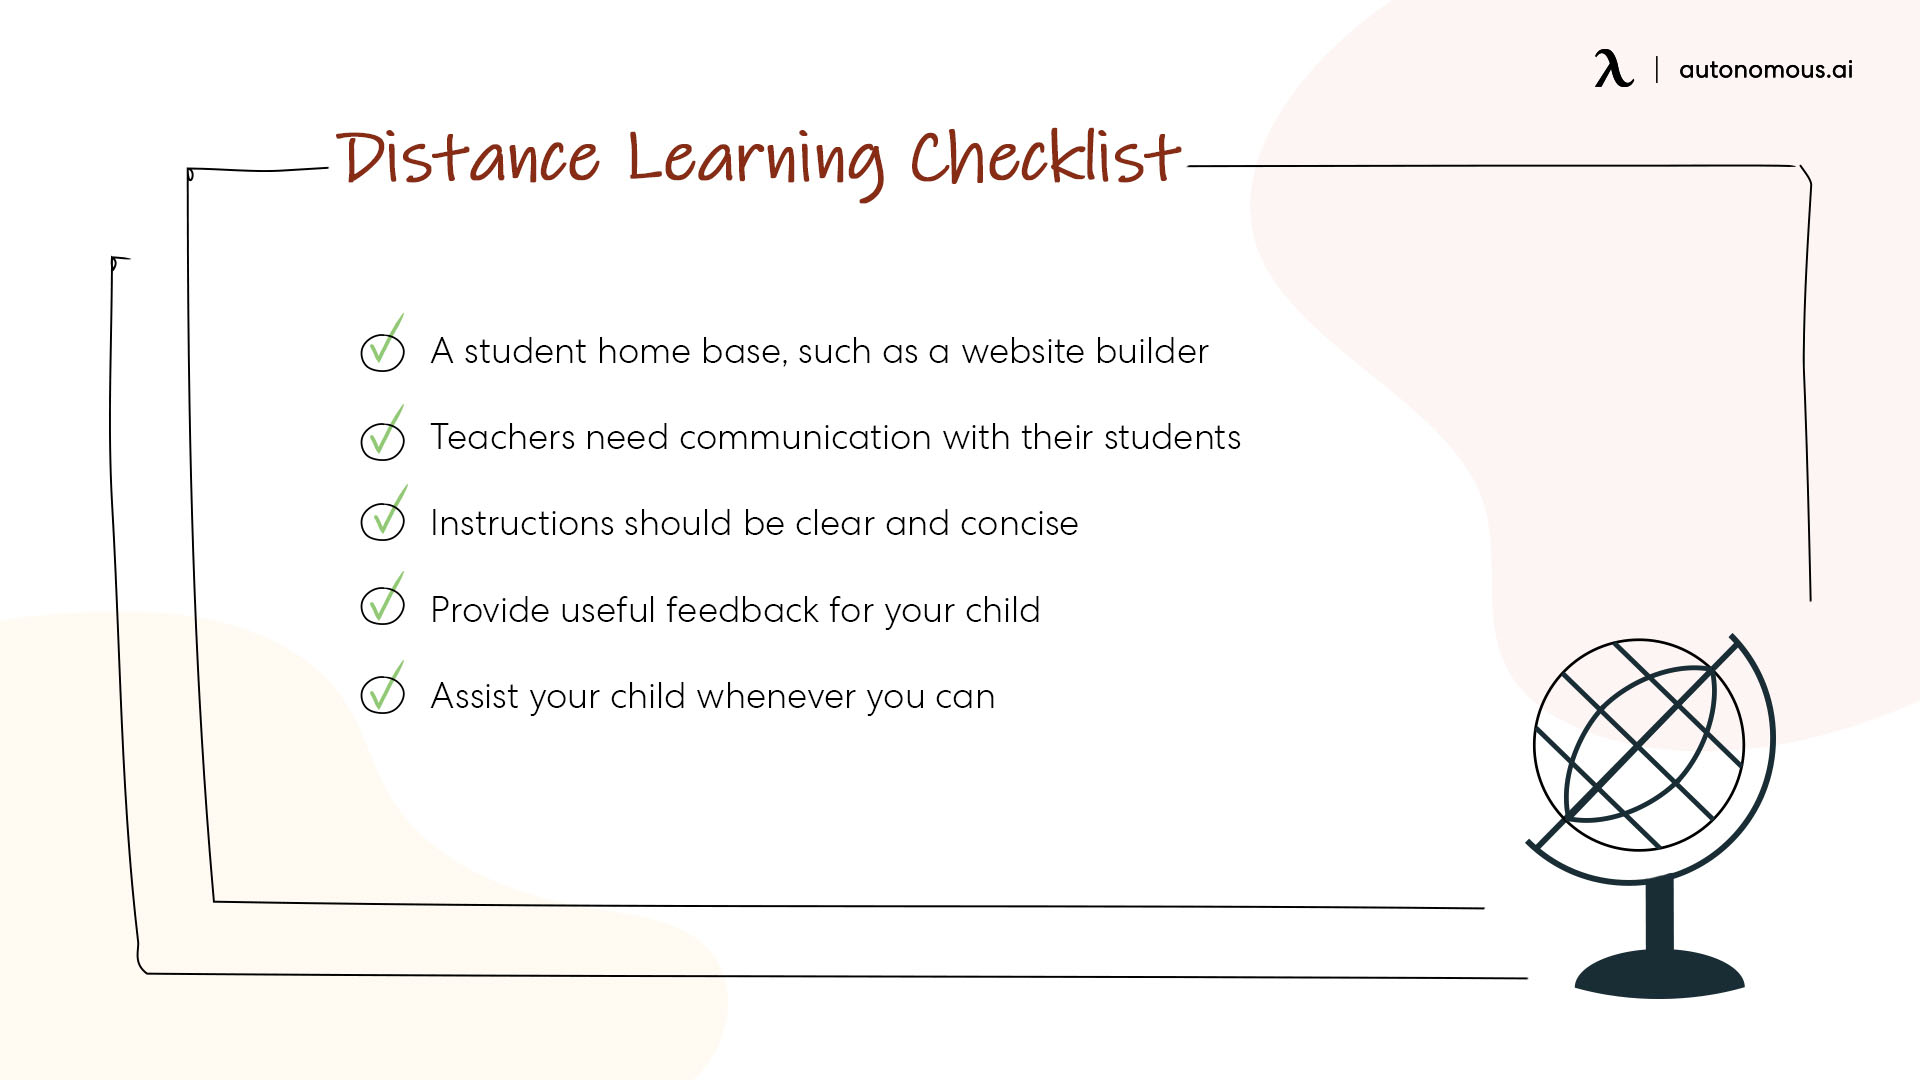 Distance Learning Checklist